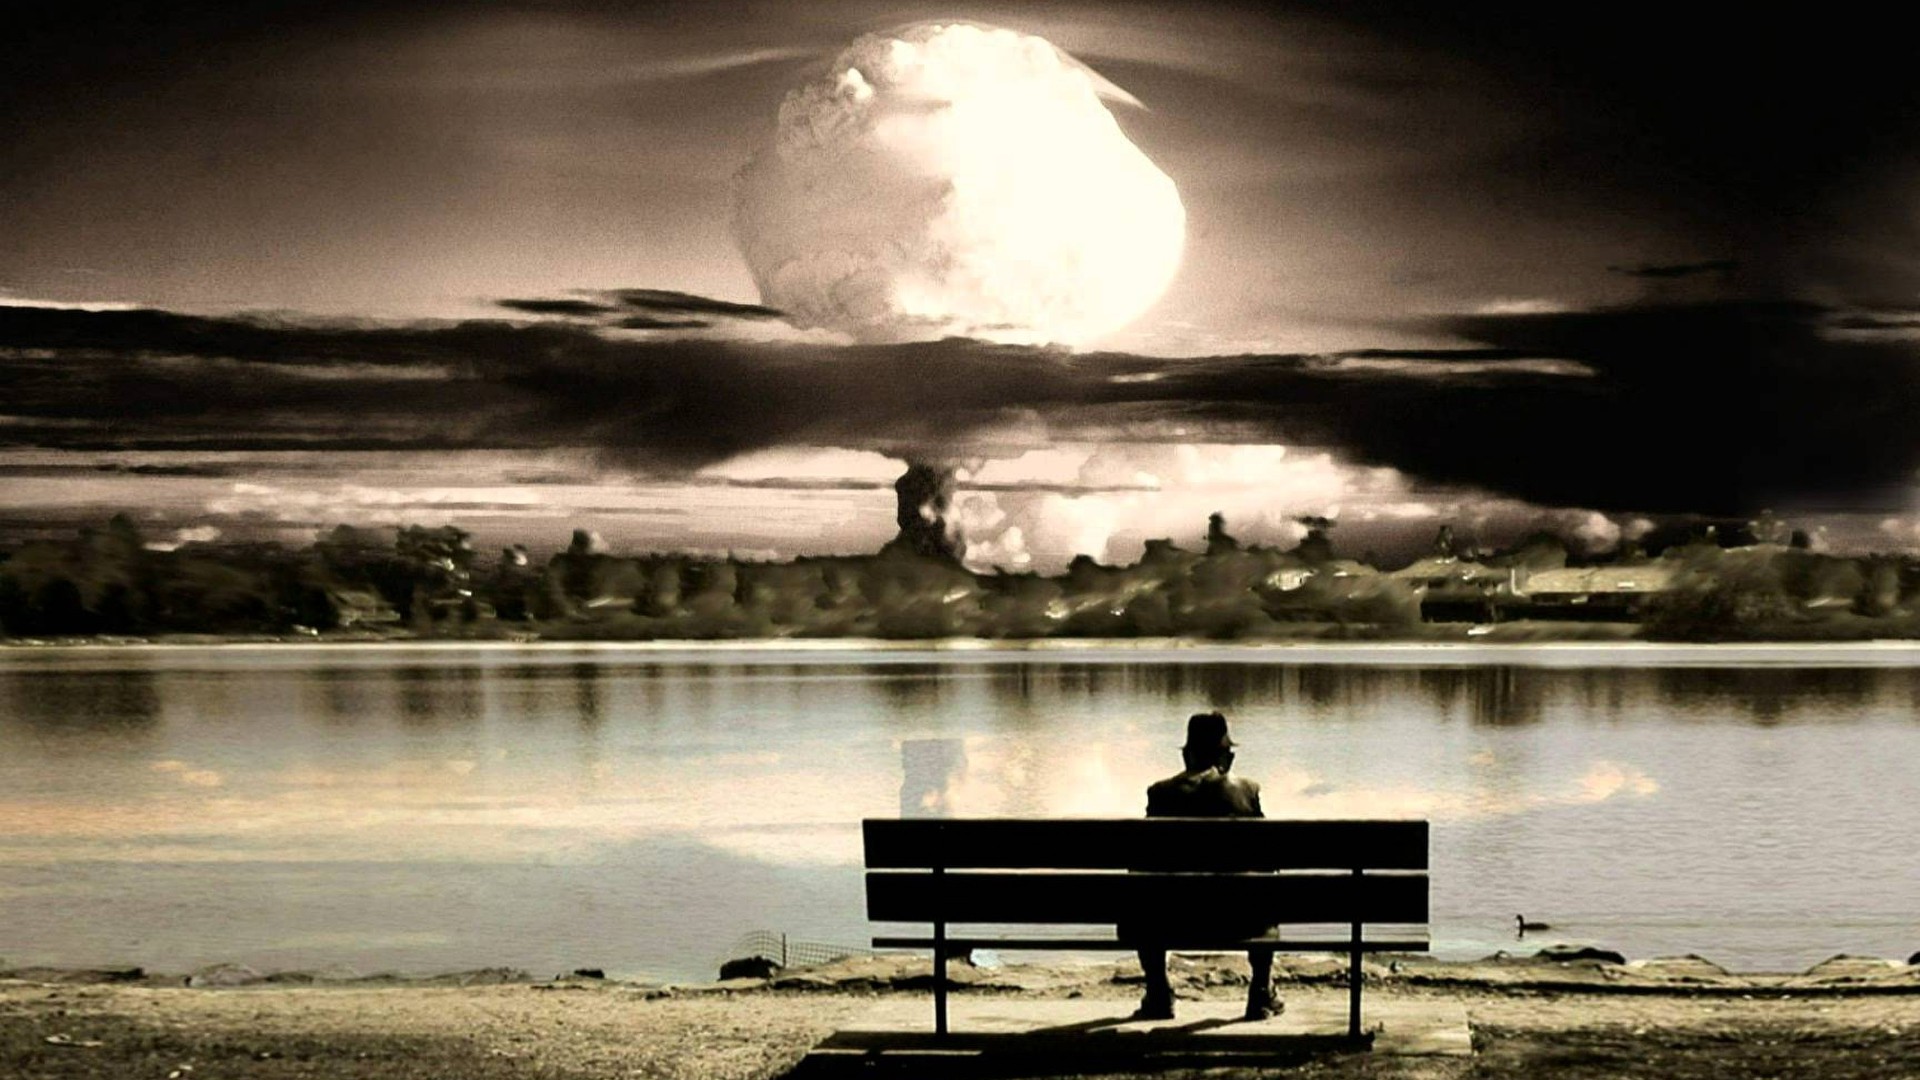 General 1920x1080 hat bench explosion apocalyptic atomic bomb artwork mushroom clouds sitting